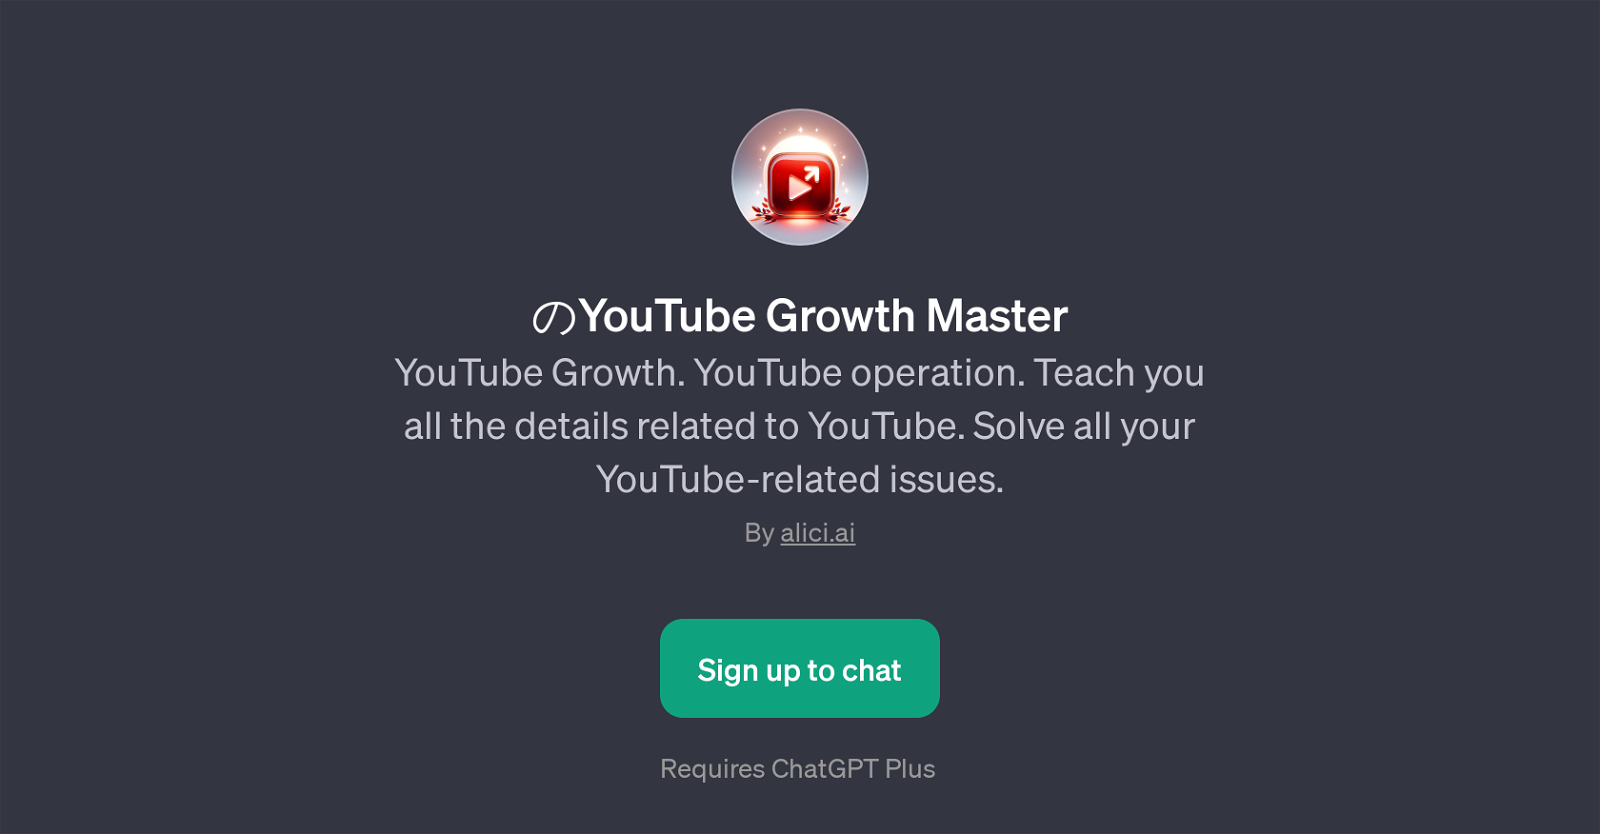 YouTube Growth Master website